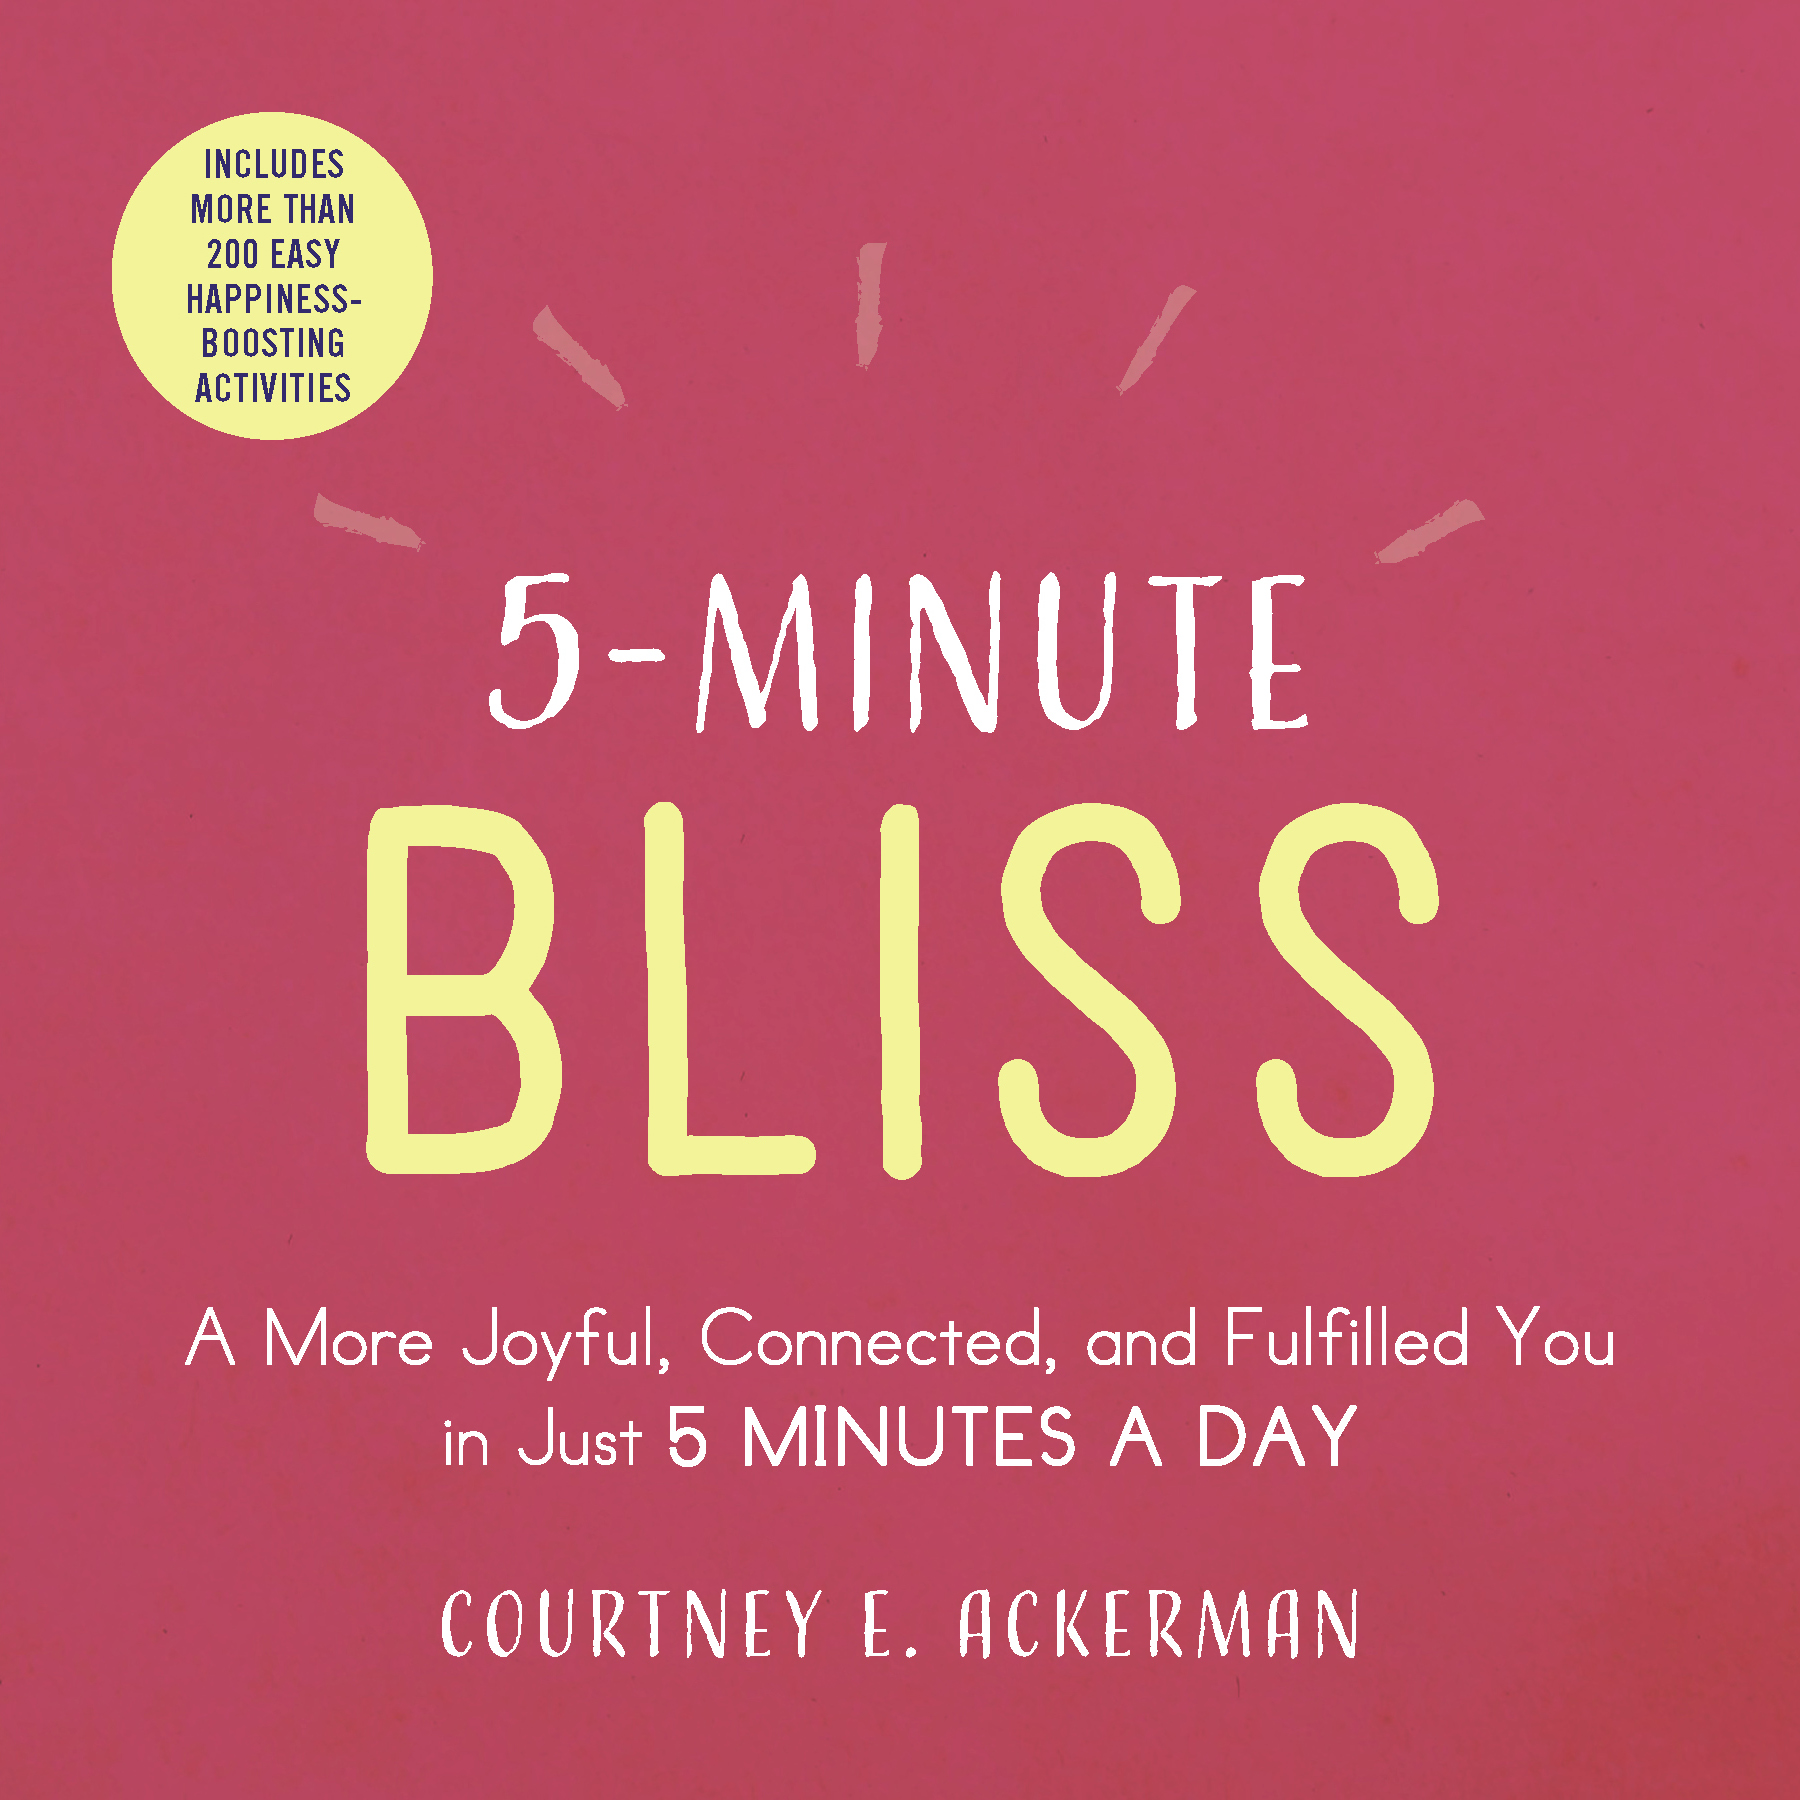 Cover art for 5 Minute Bliss by Courtney E. Akerman.